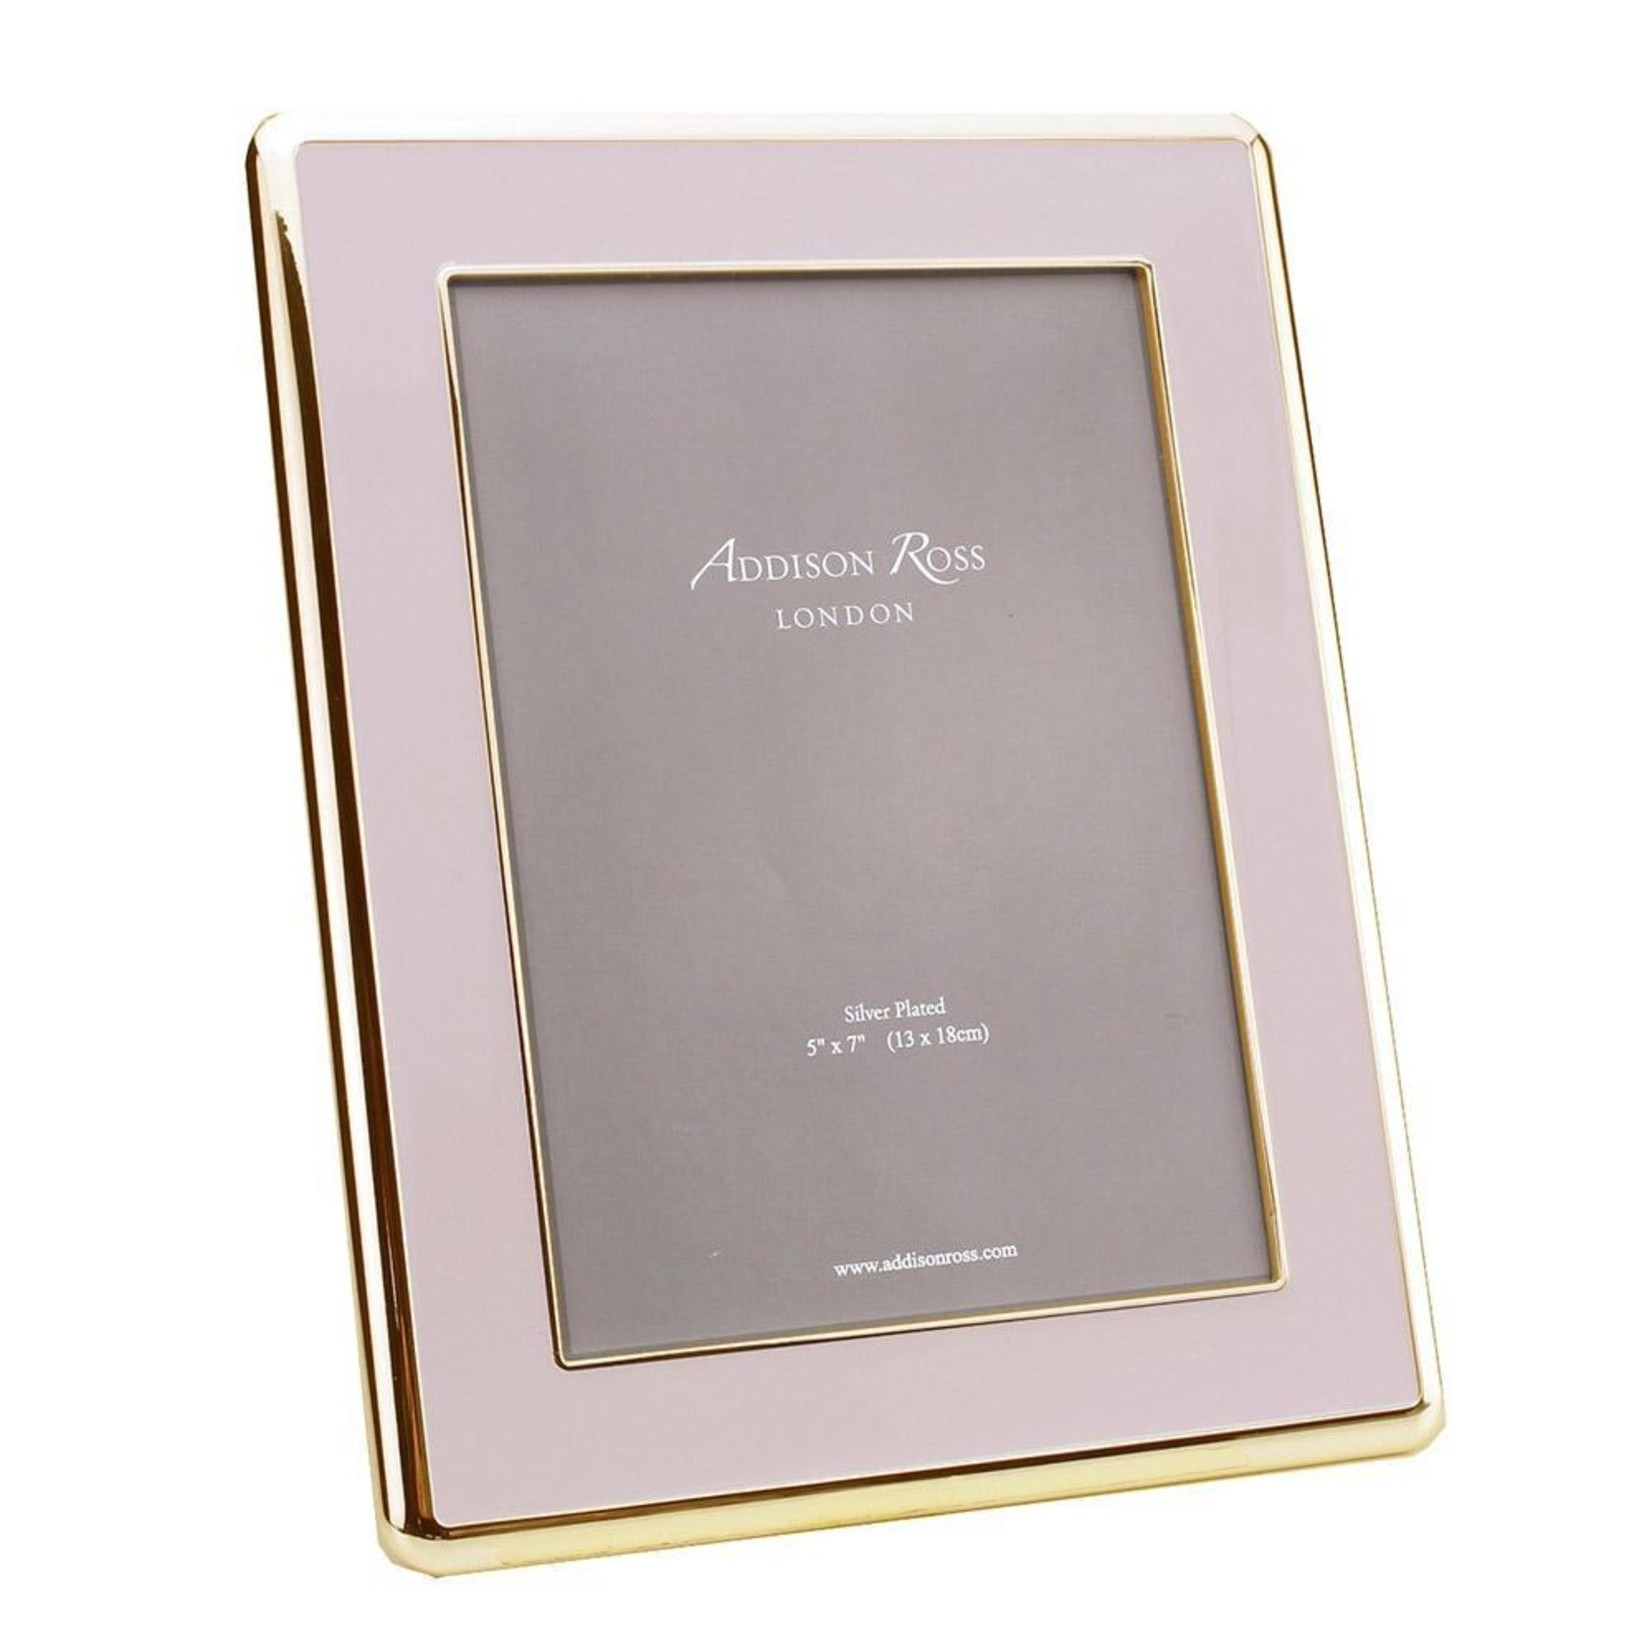 Addison Ross Colored Enamel & Gold Curved Photo Frame